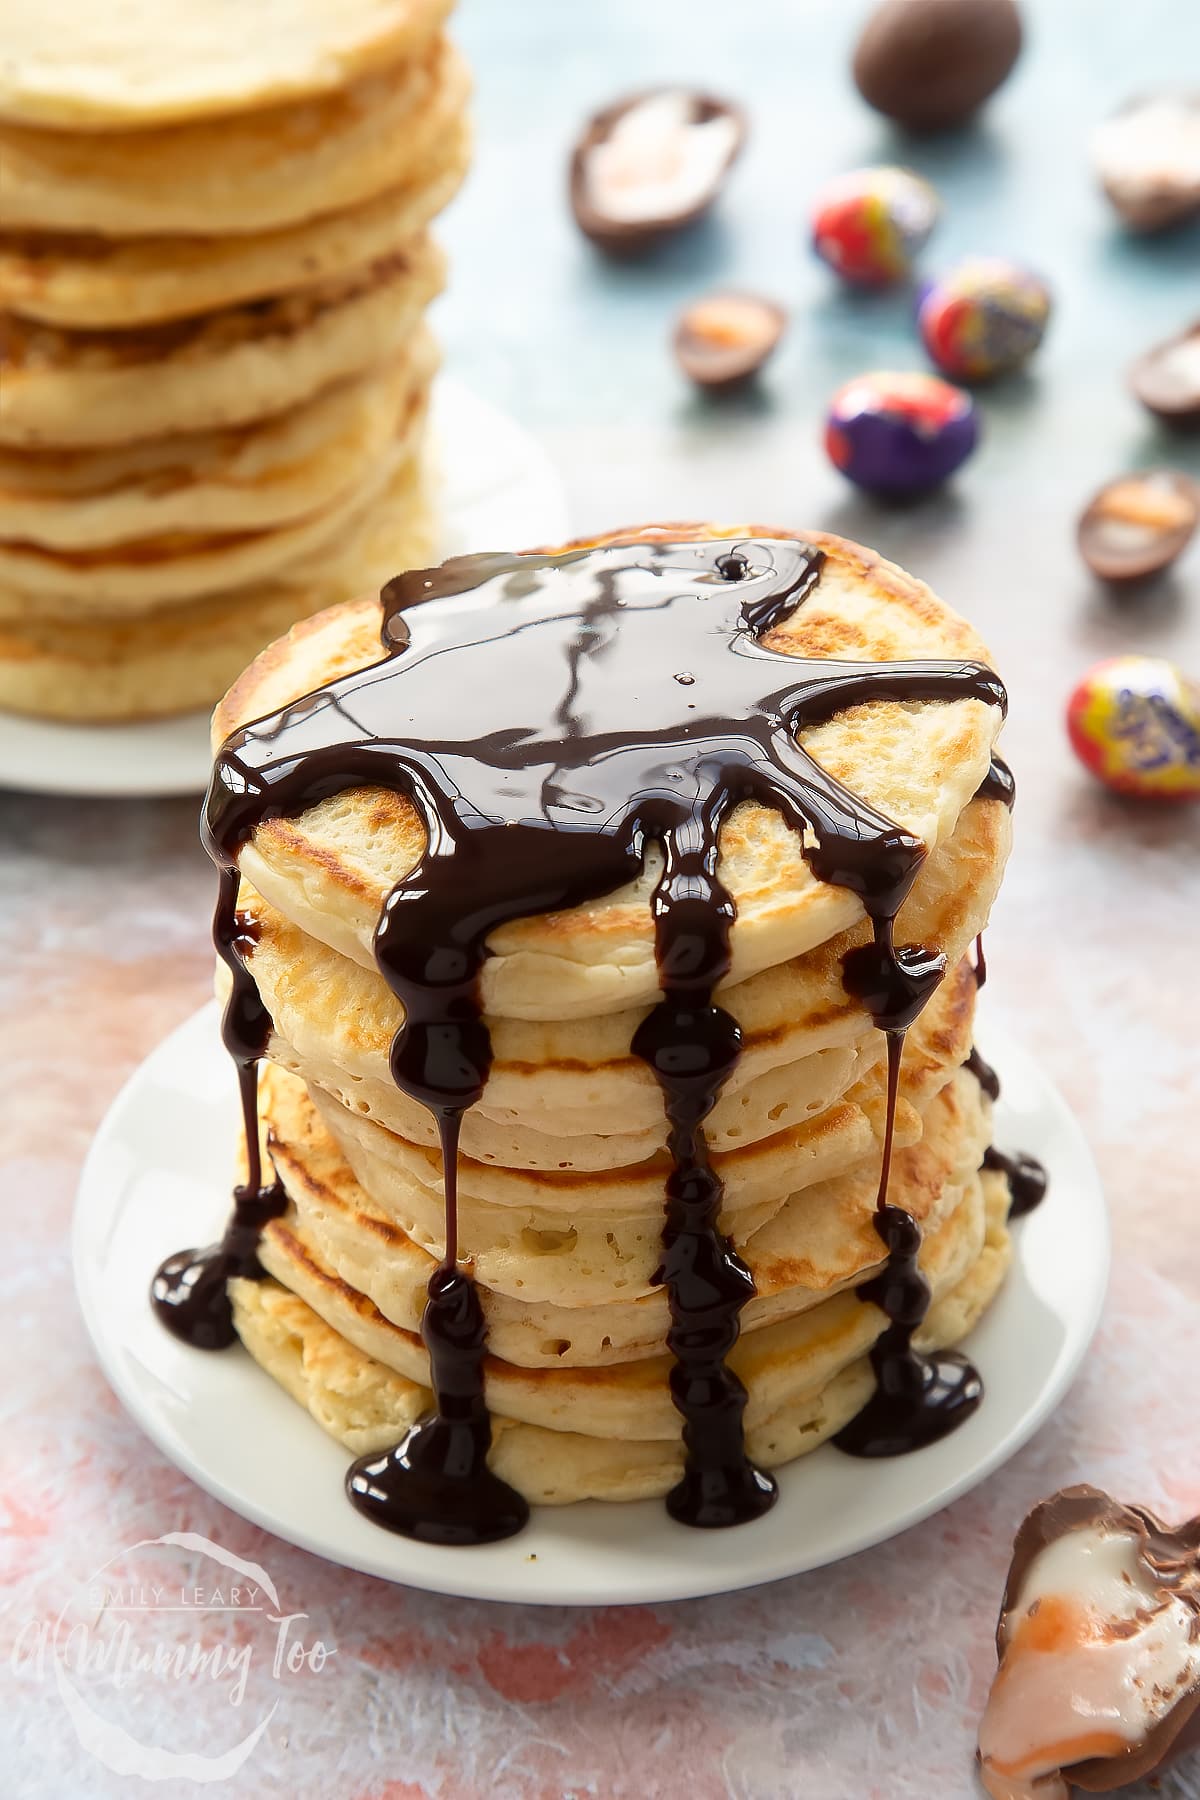 A tall stack of Creme Egg pancakes on a small white plate. The stack is topped with chocolate sauce.